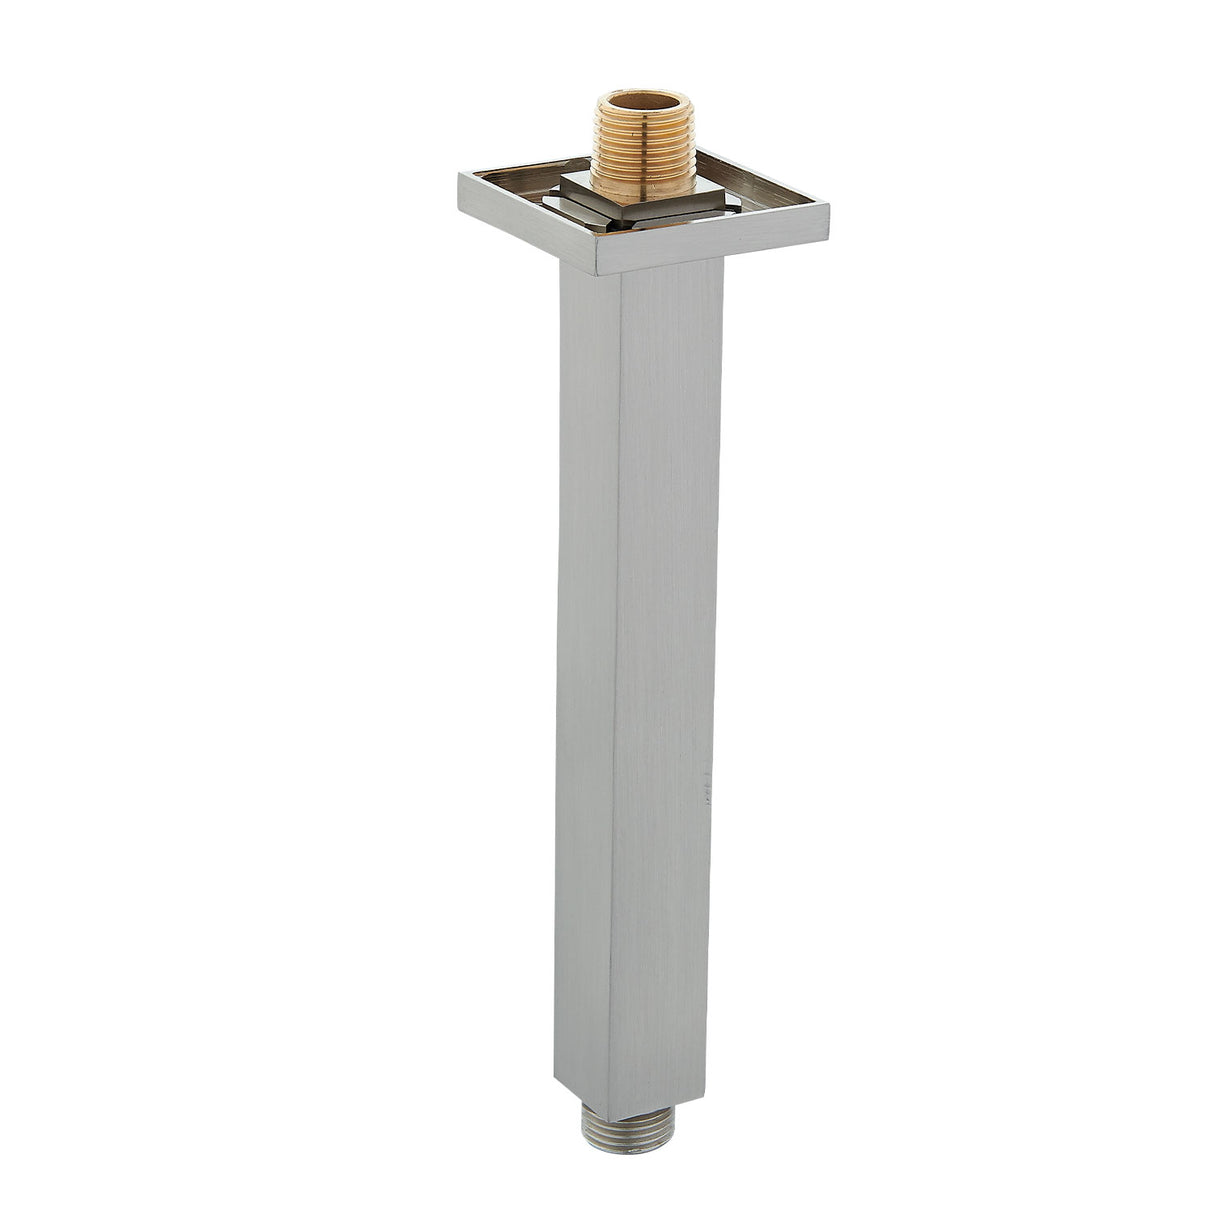 DAX Brass Square Ceiling Shower Arm, 8", Brushed Nickel DAX-1012-200-BN